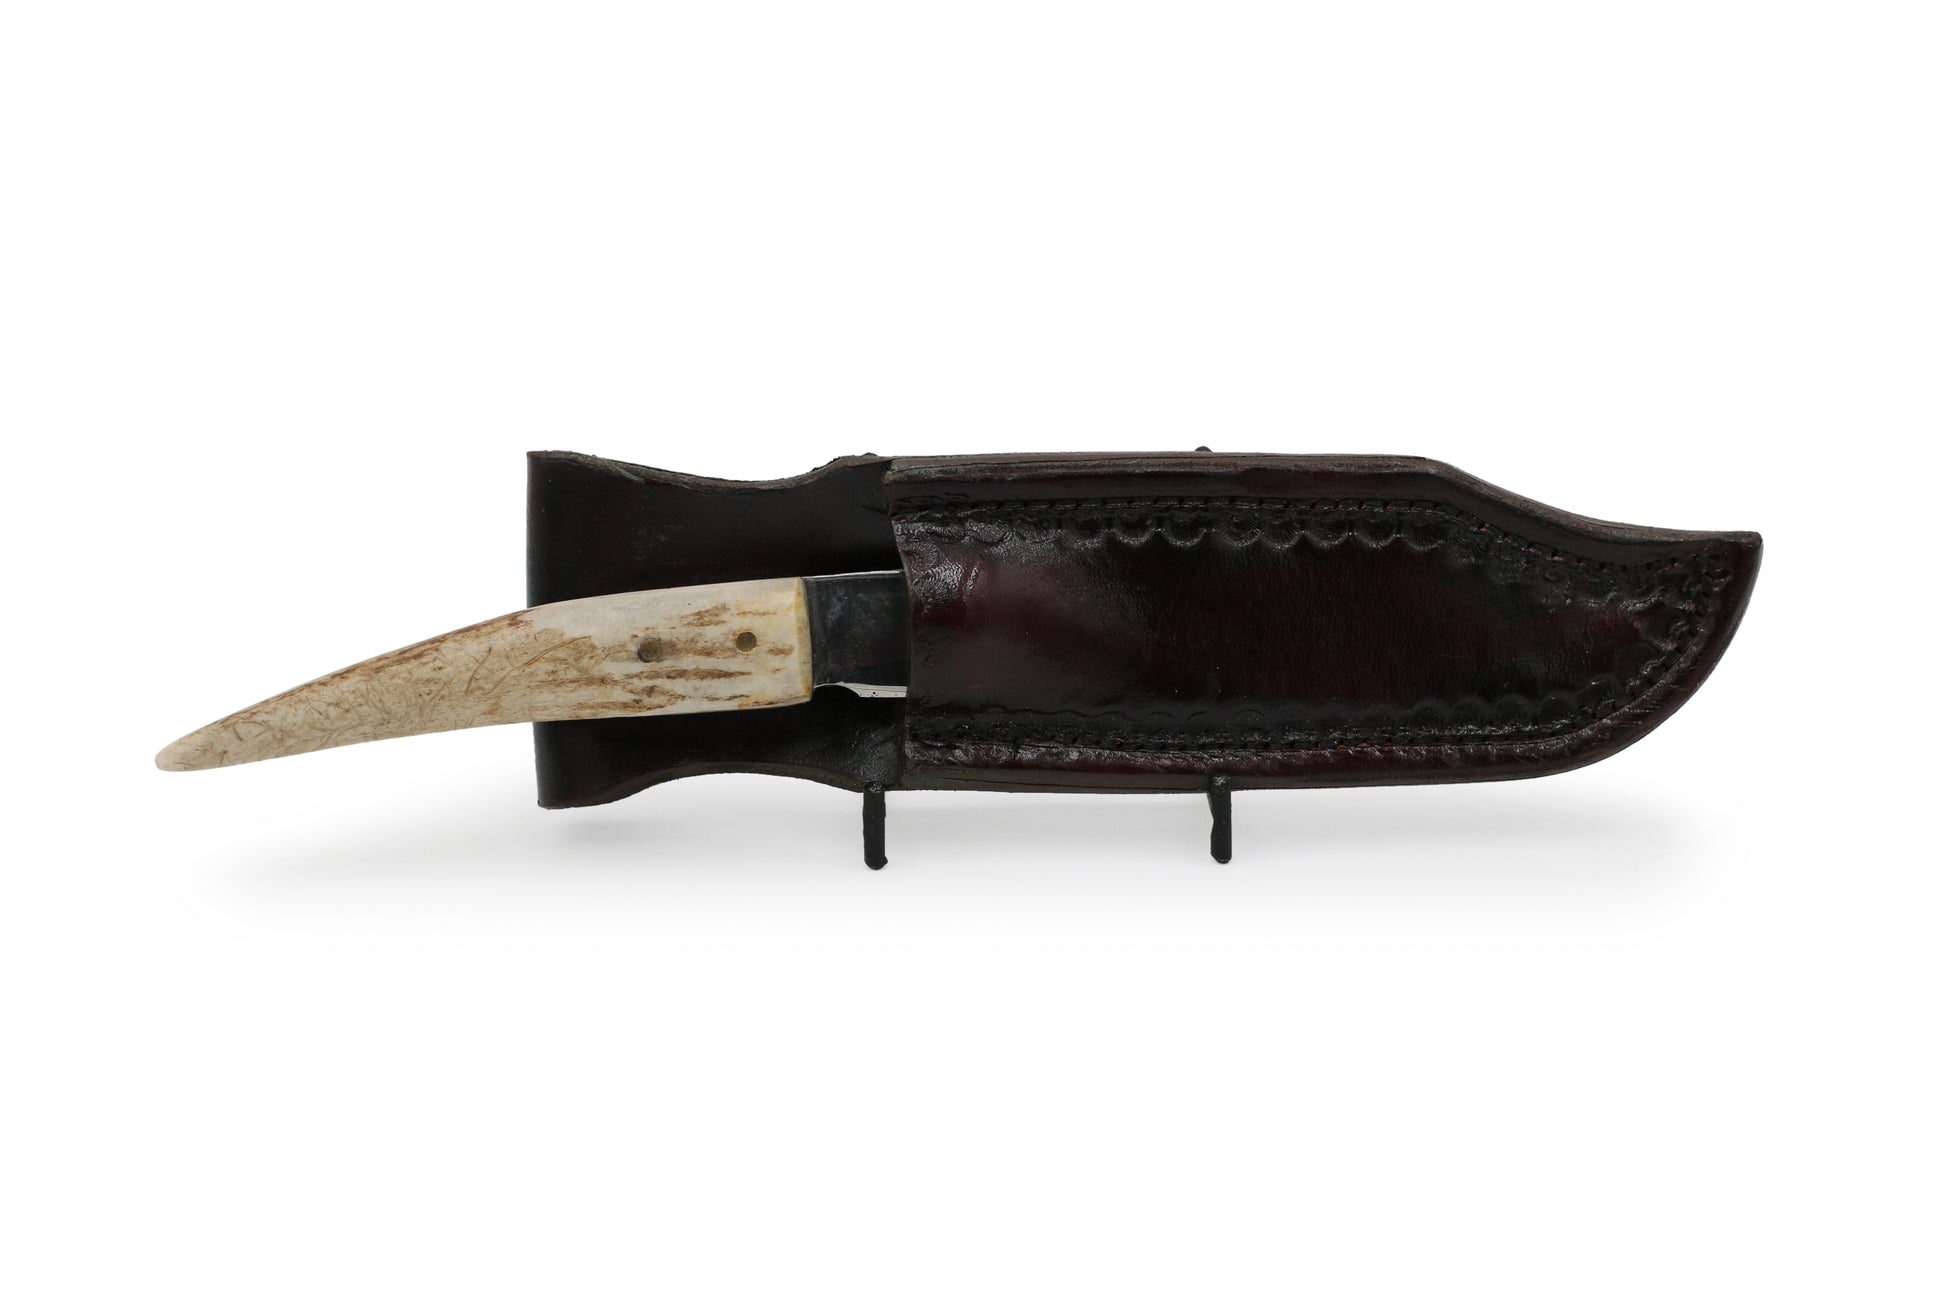 Knife Handcrafted from Saw Blade with Handcrafted Elk Horn Handle and Stamped Dark Brown Handcrafted Leather Sheath - Annabel's Jewelry & Leather